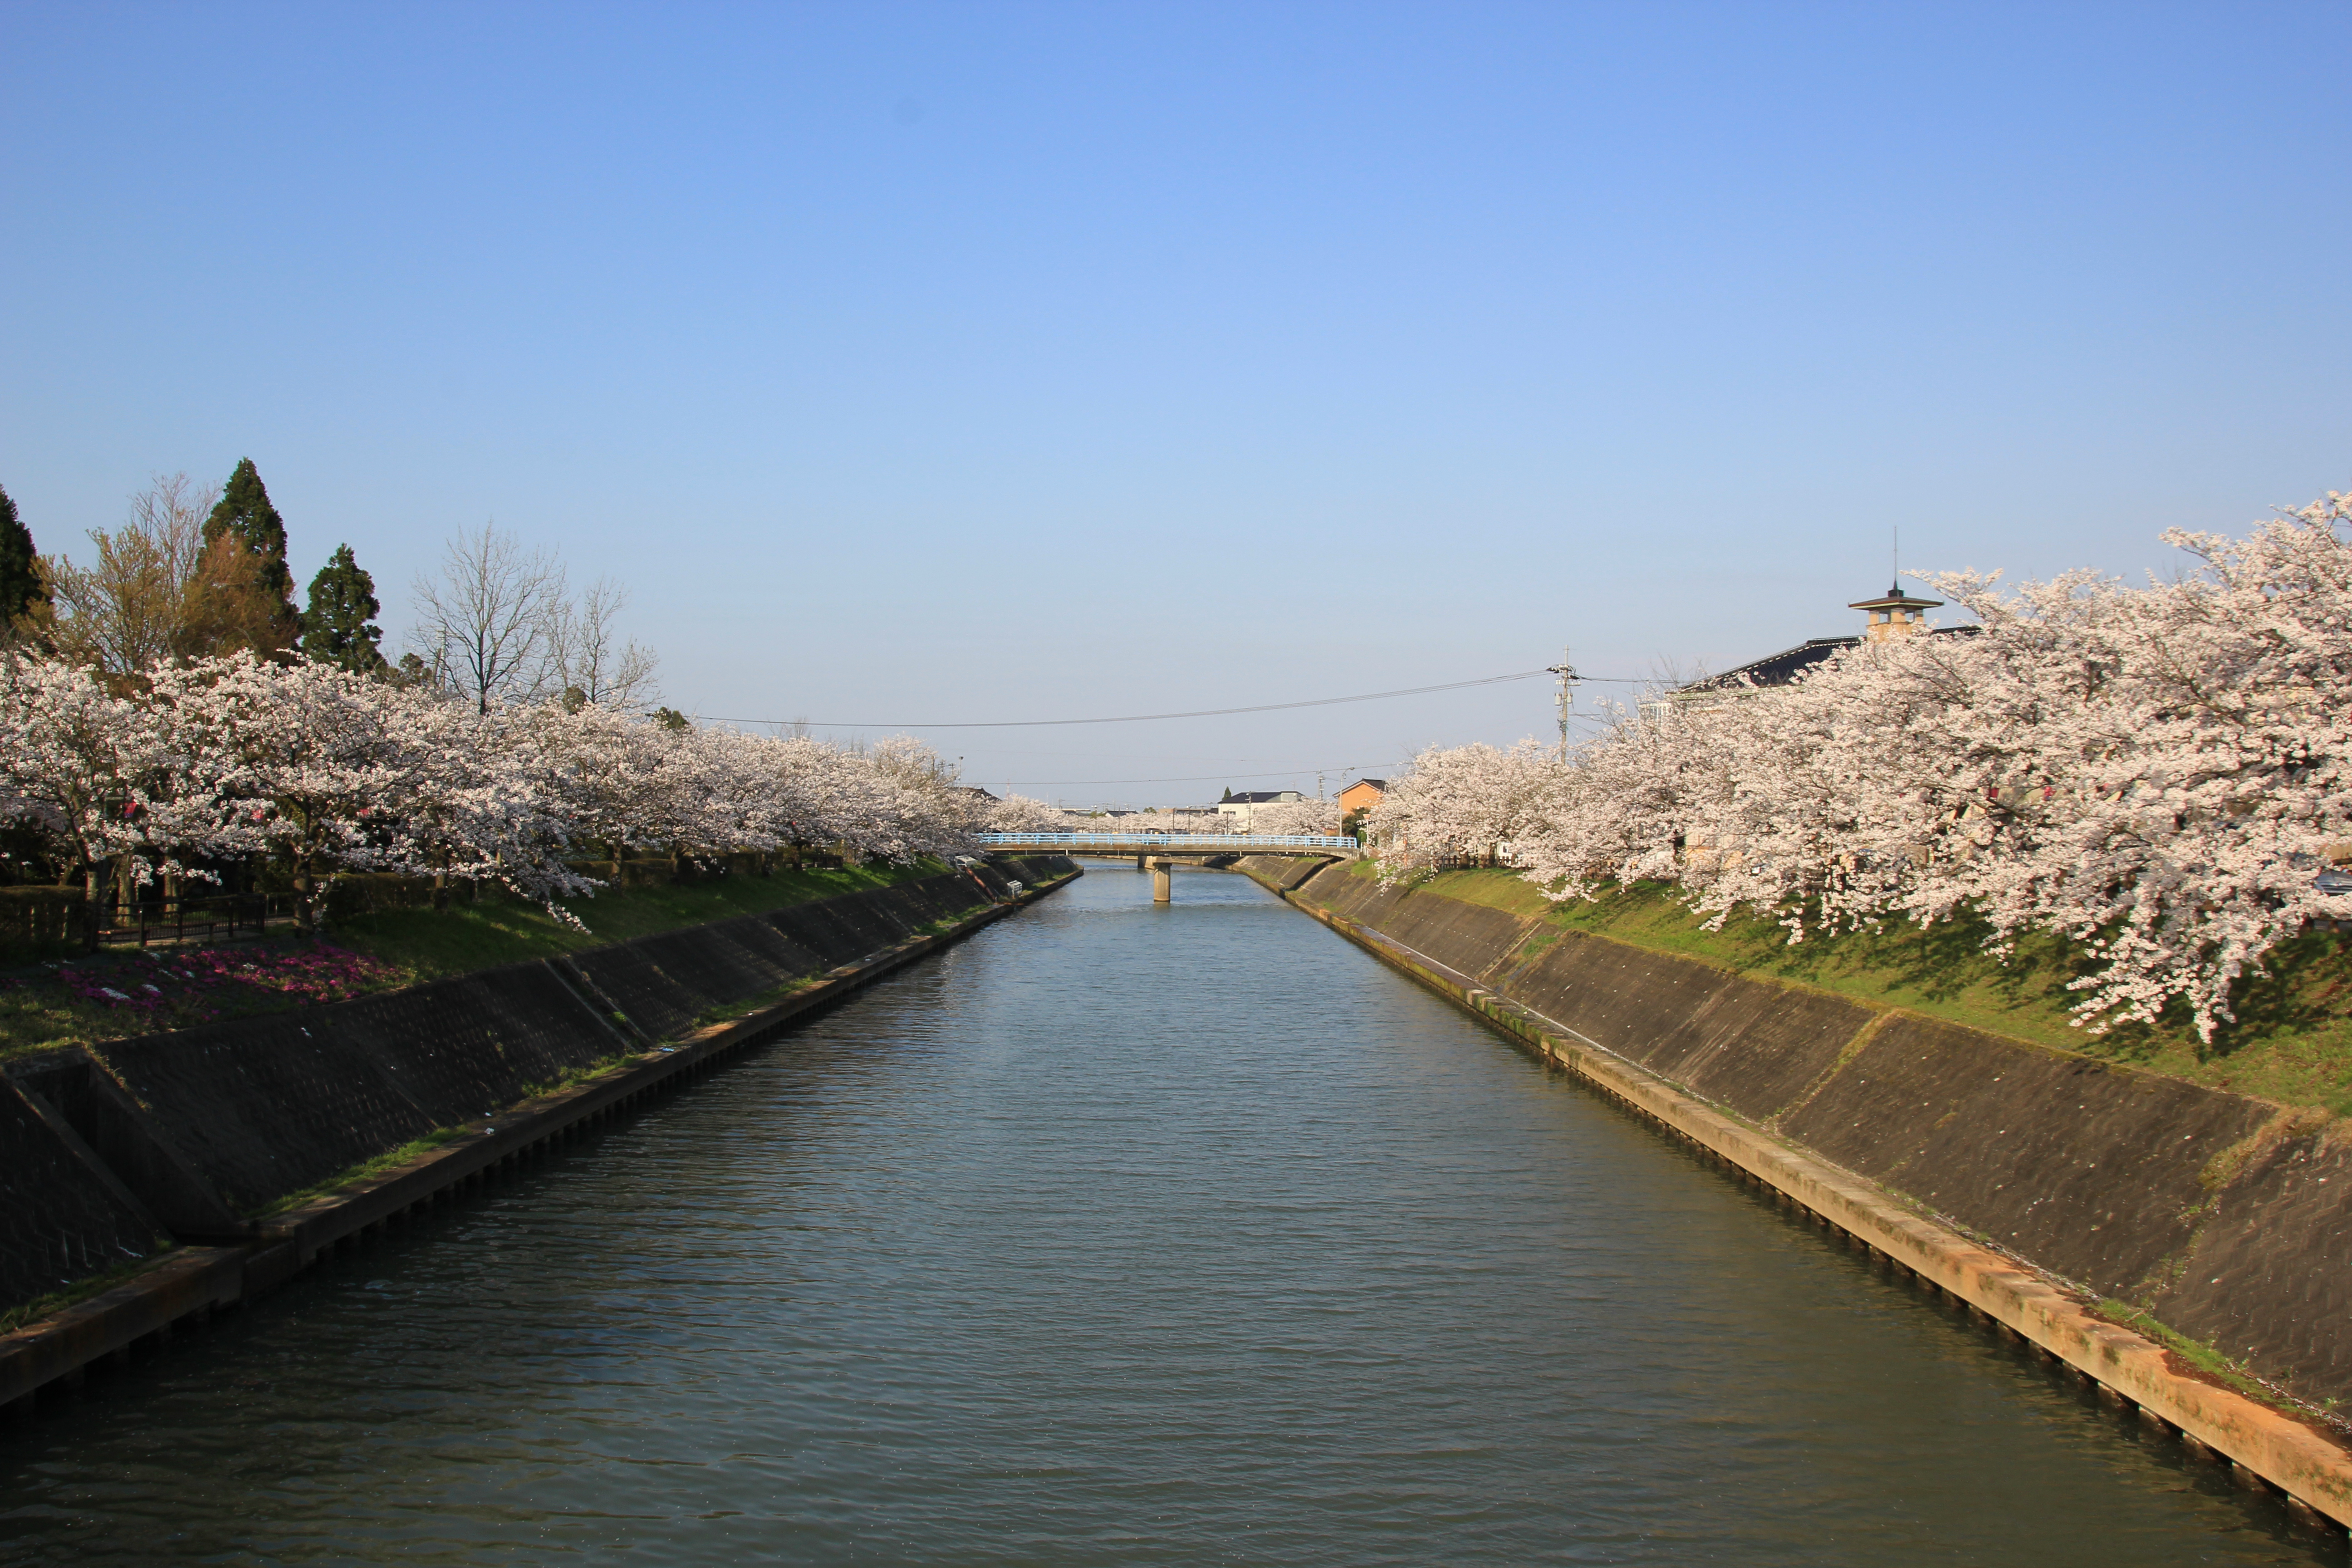 【2】Recommended spots in Hietsuno for beautiful cherry blossoms in spring